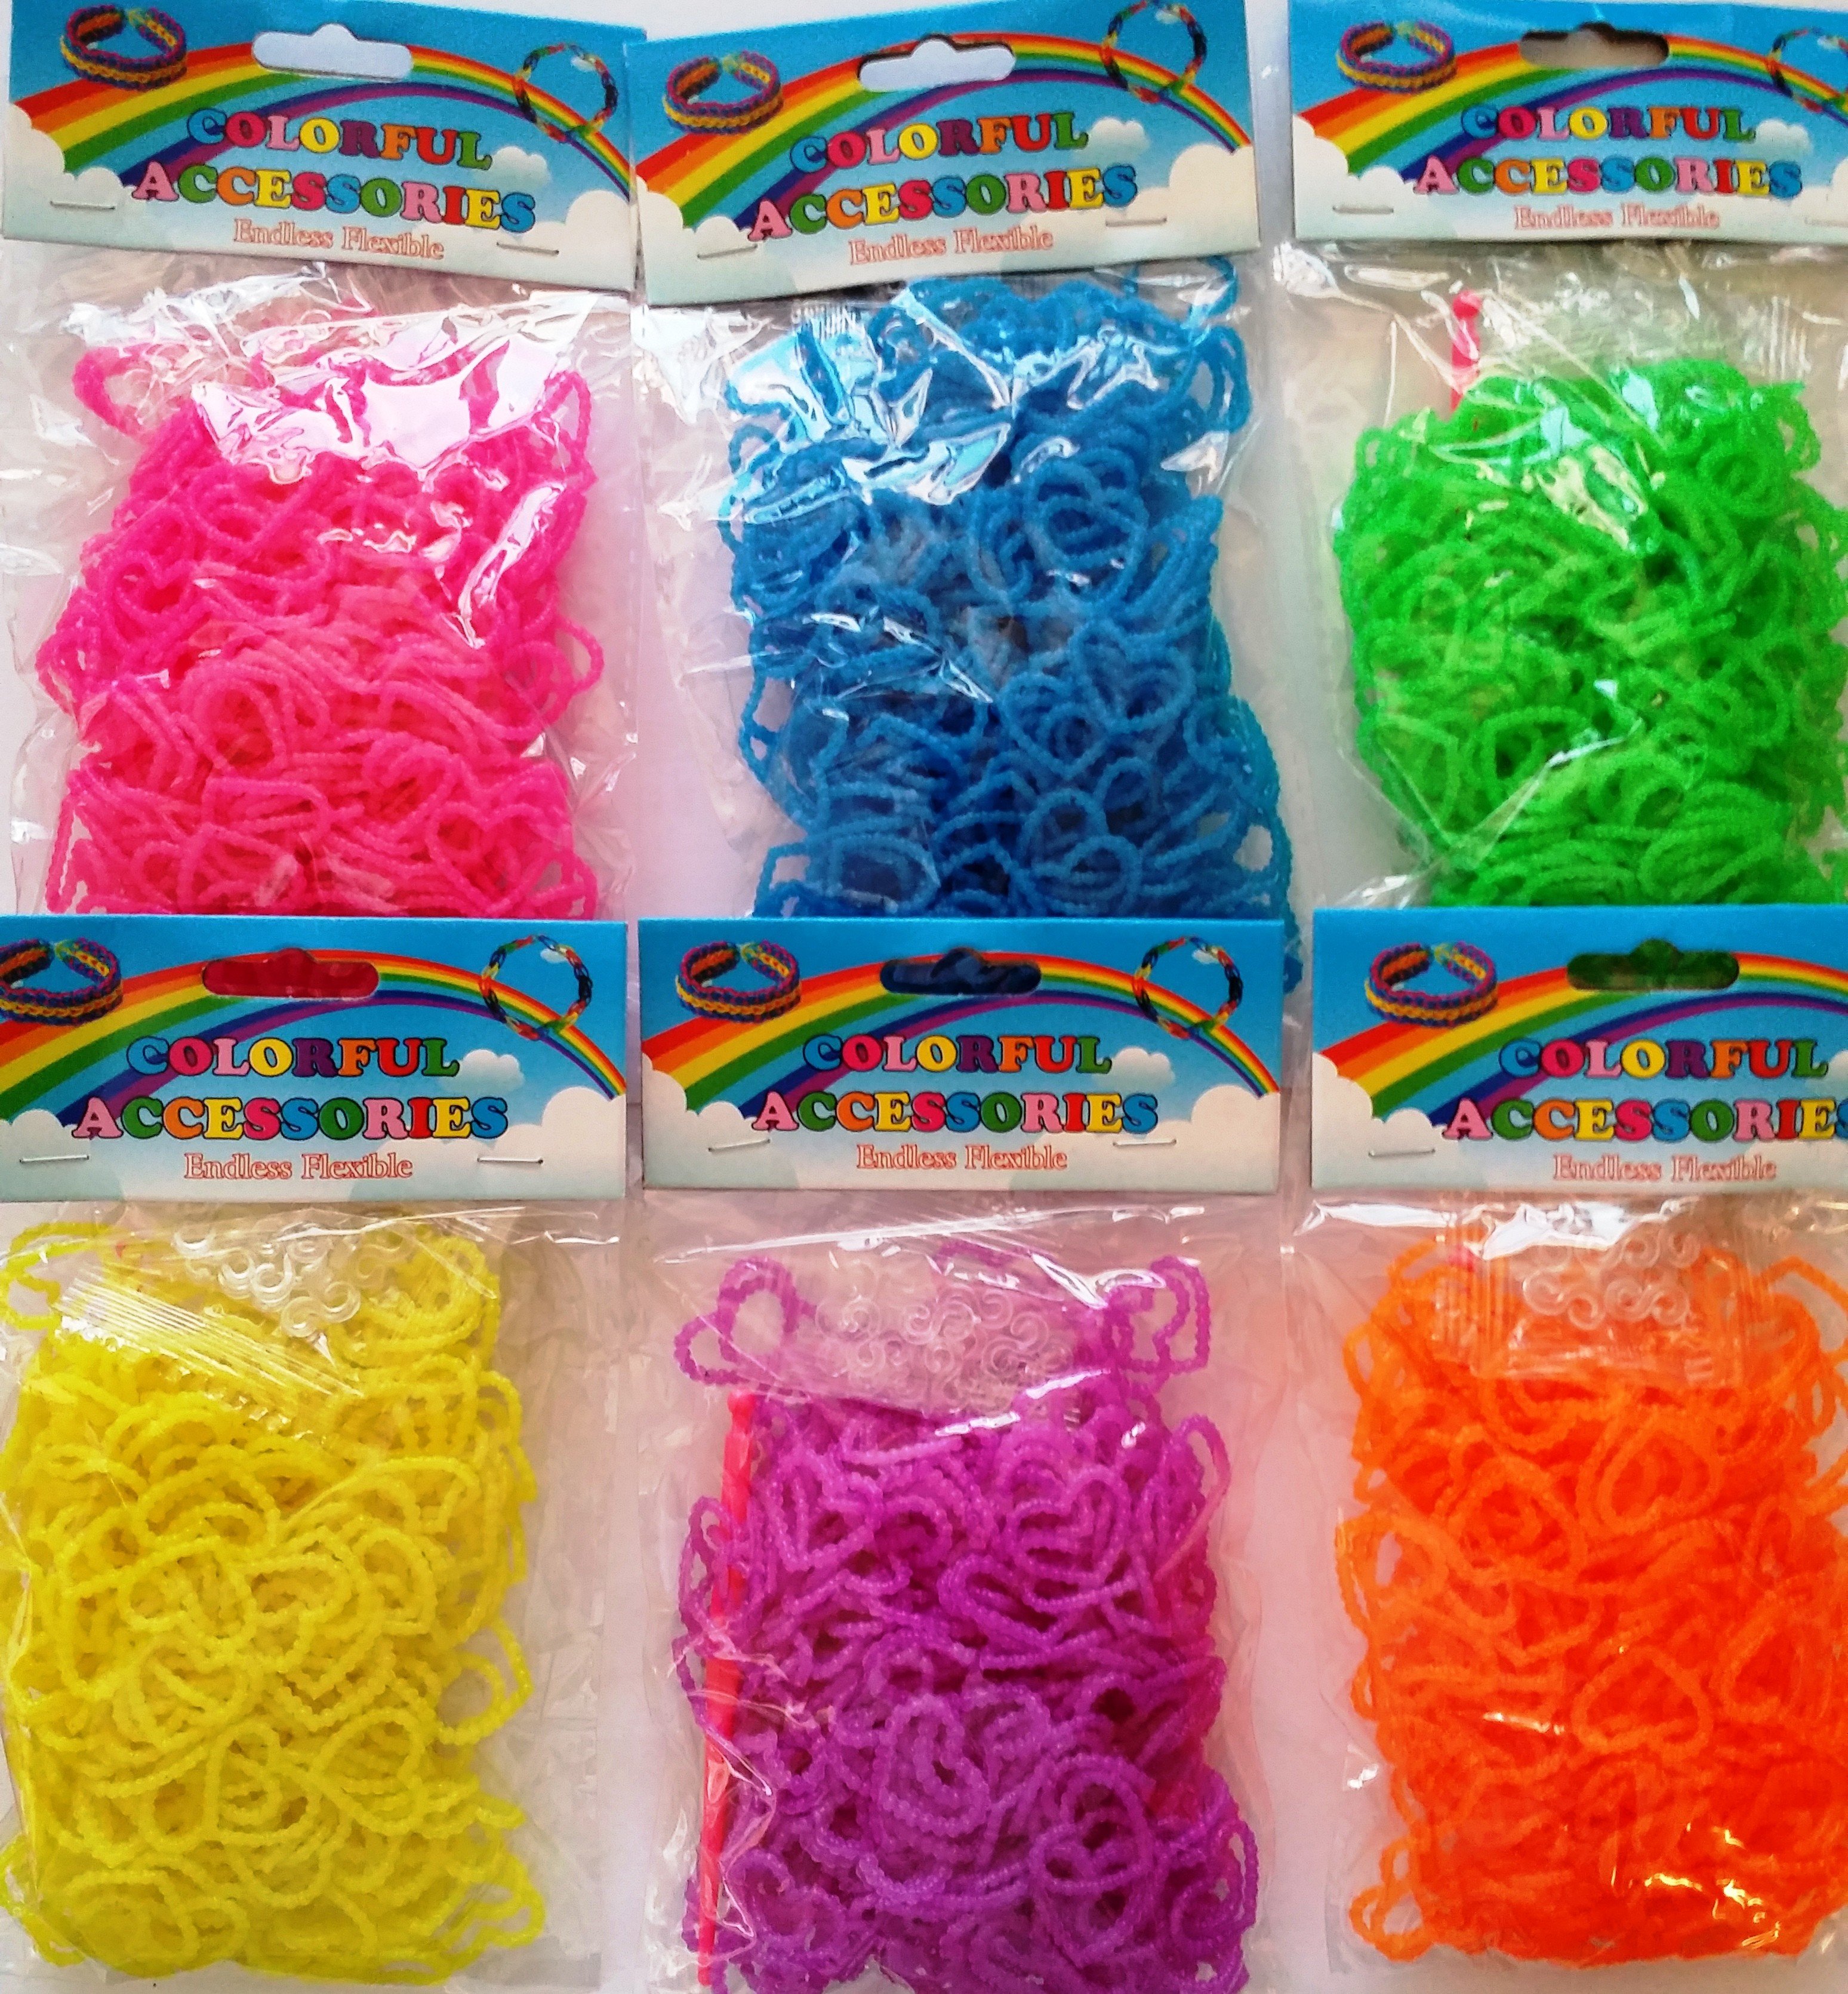 Colourful loom bands